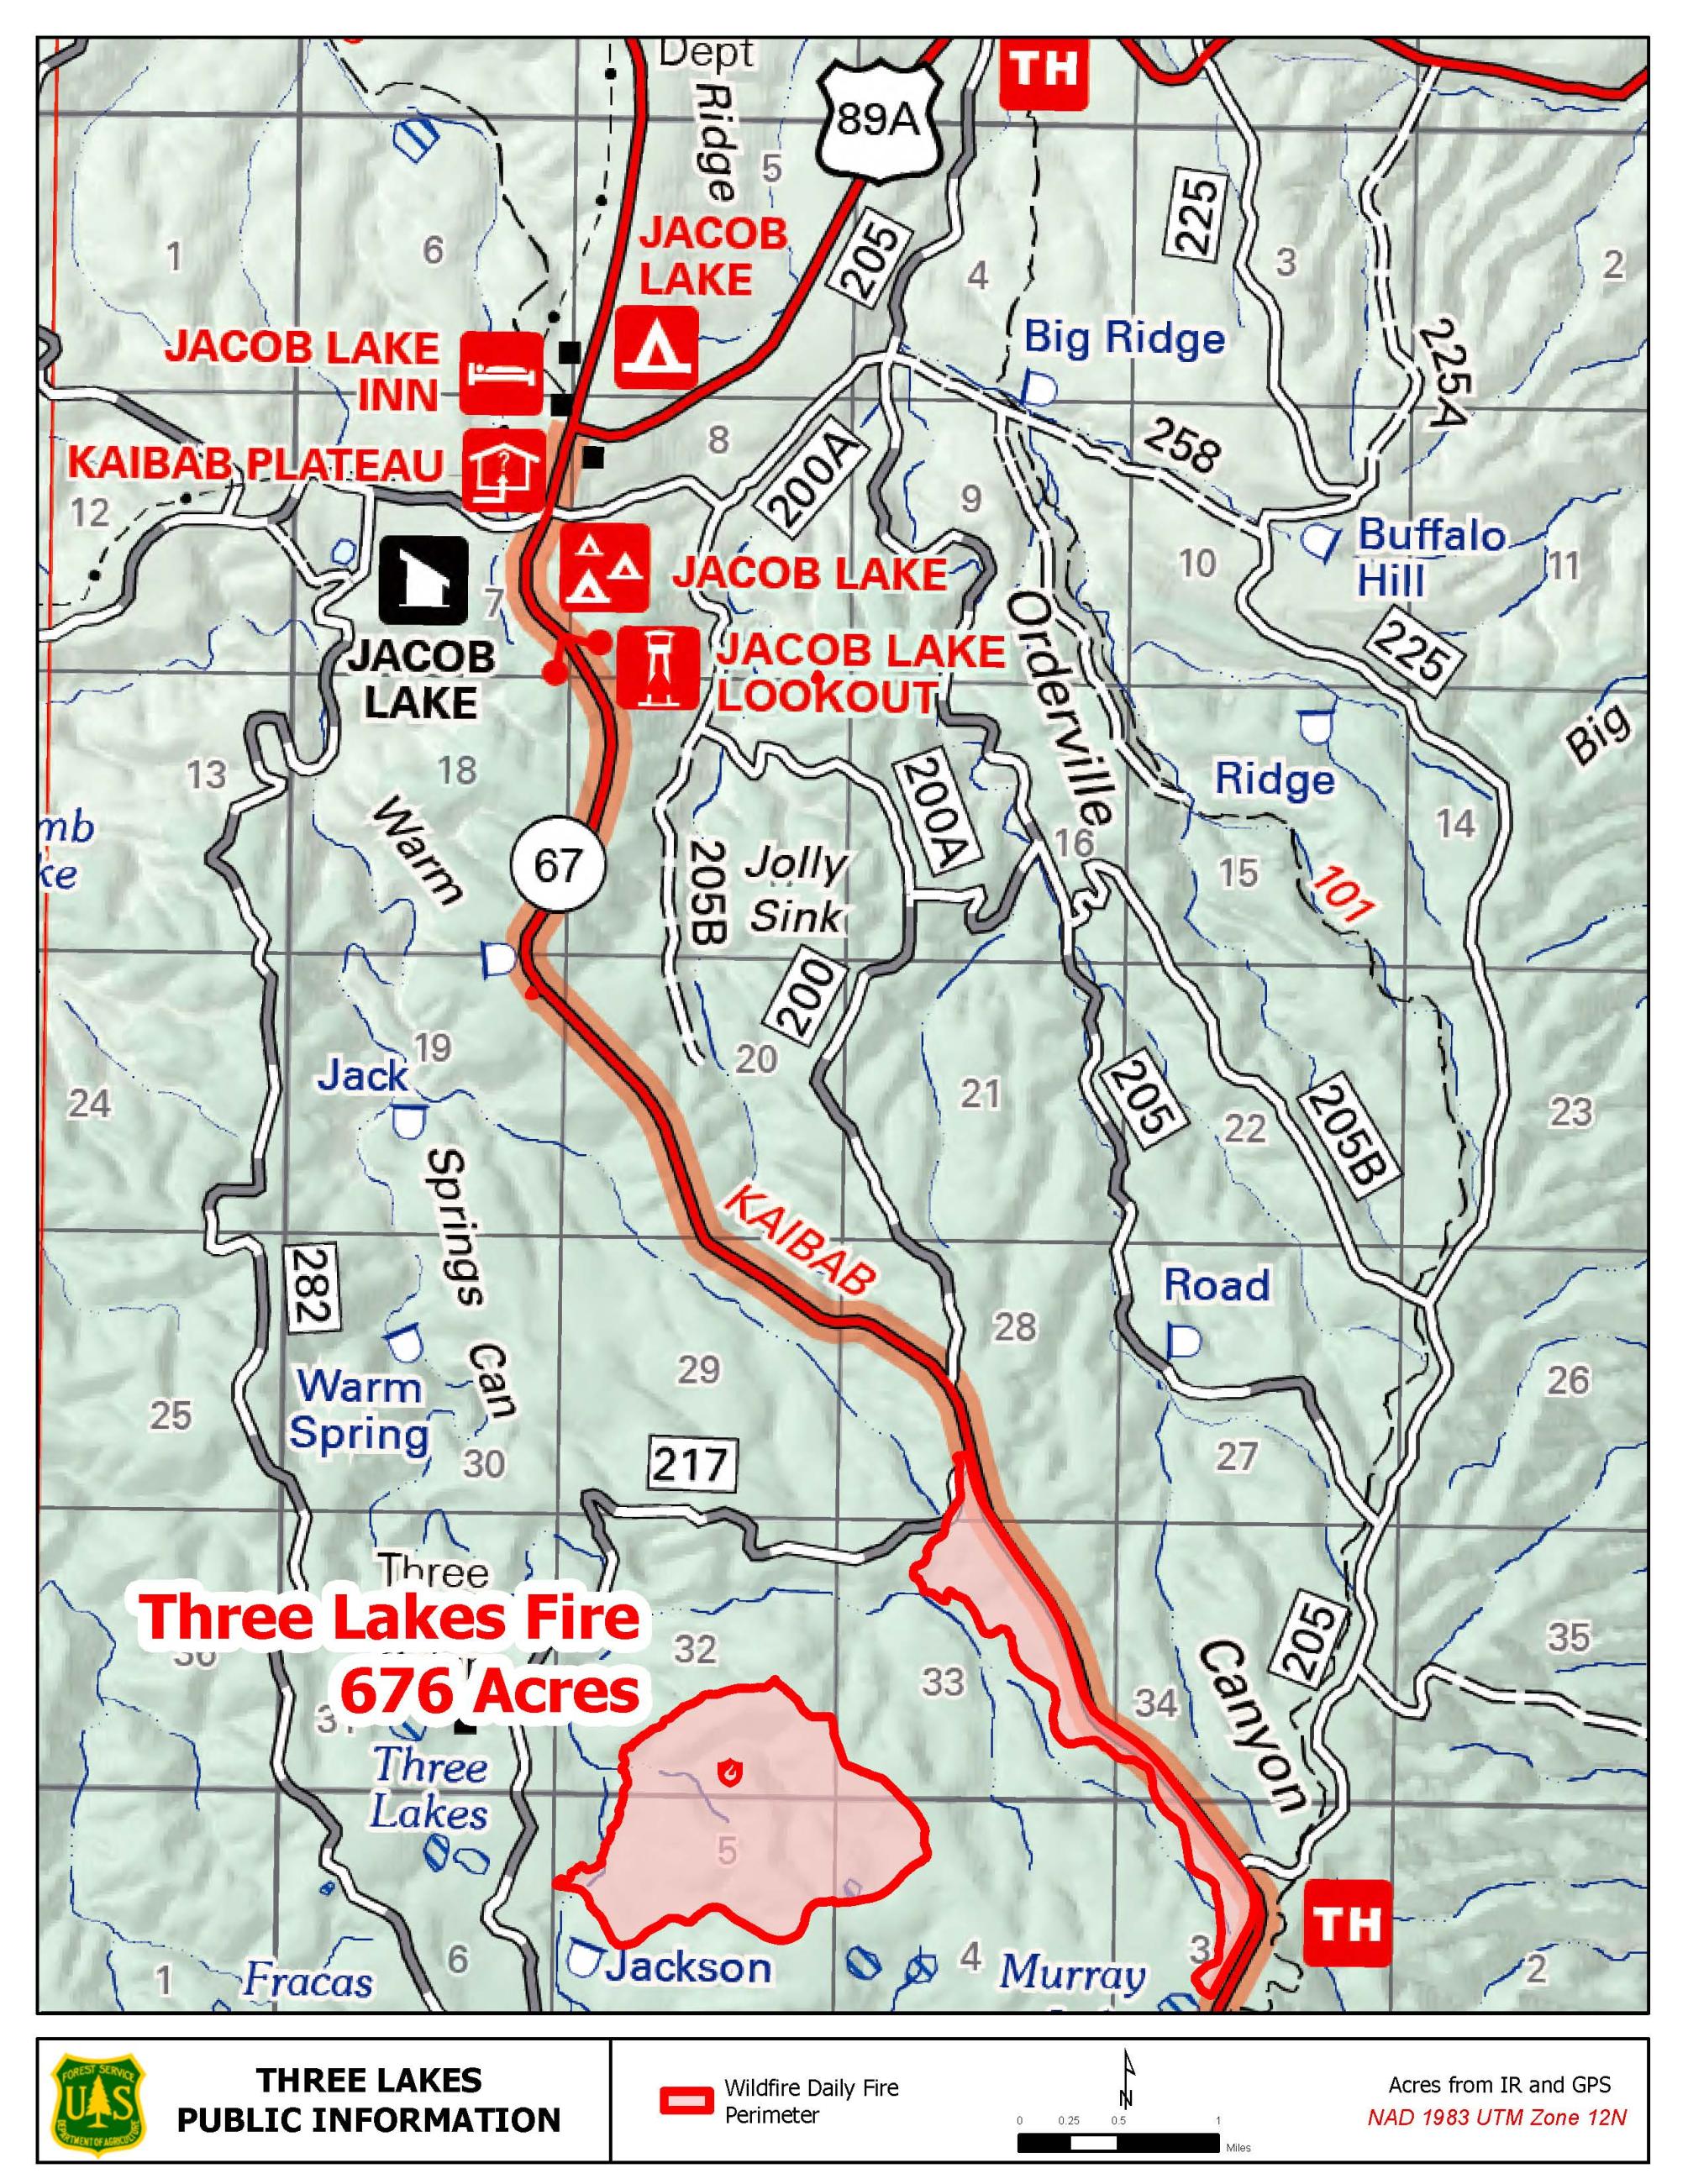 Map of the Three Lakes Fire area.